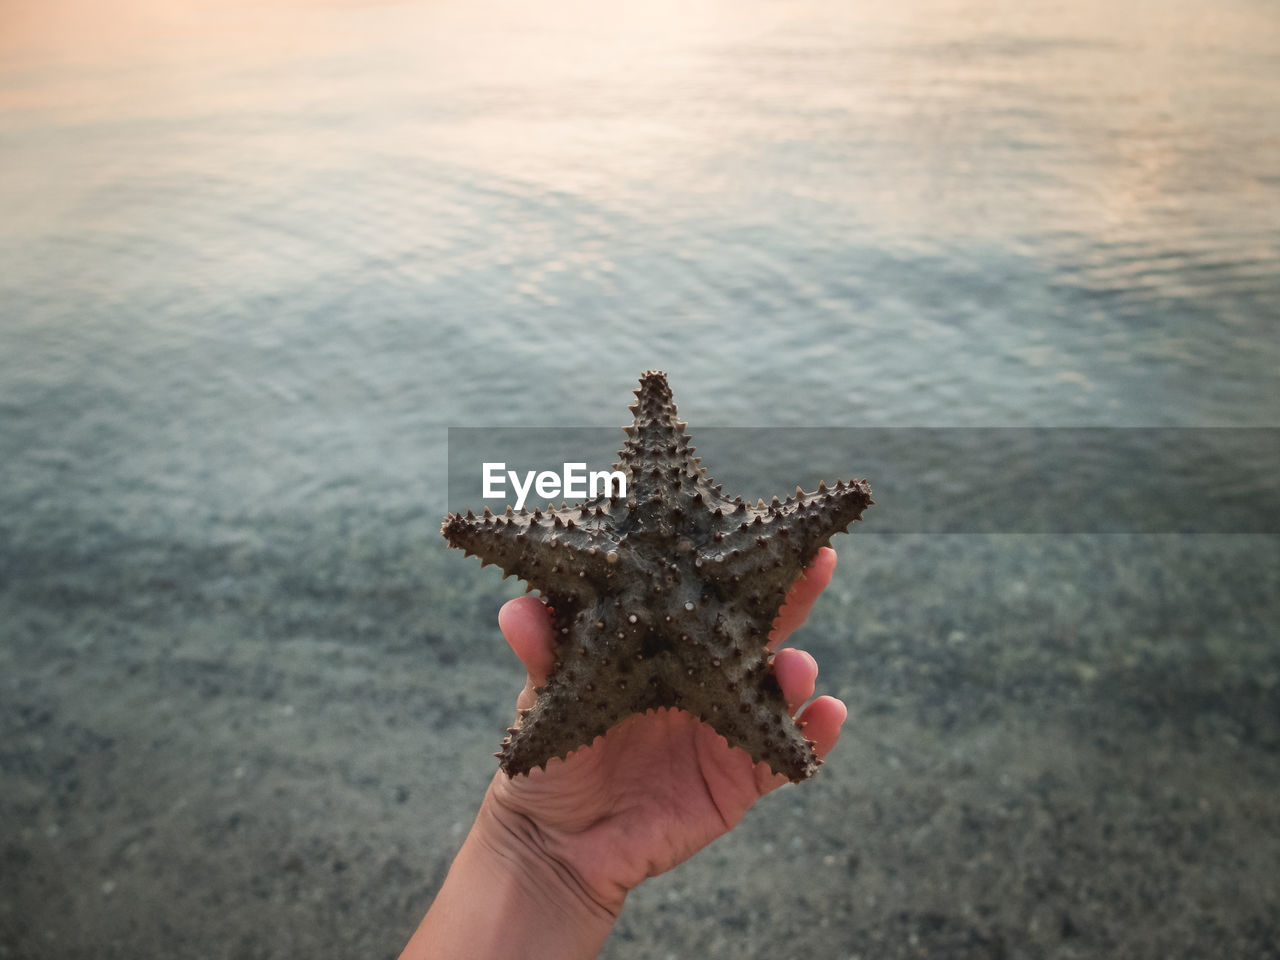 Cropped image of hand holding starfish against sea